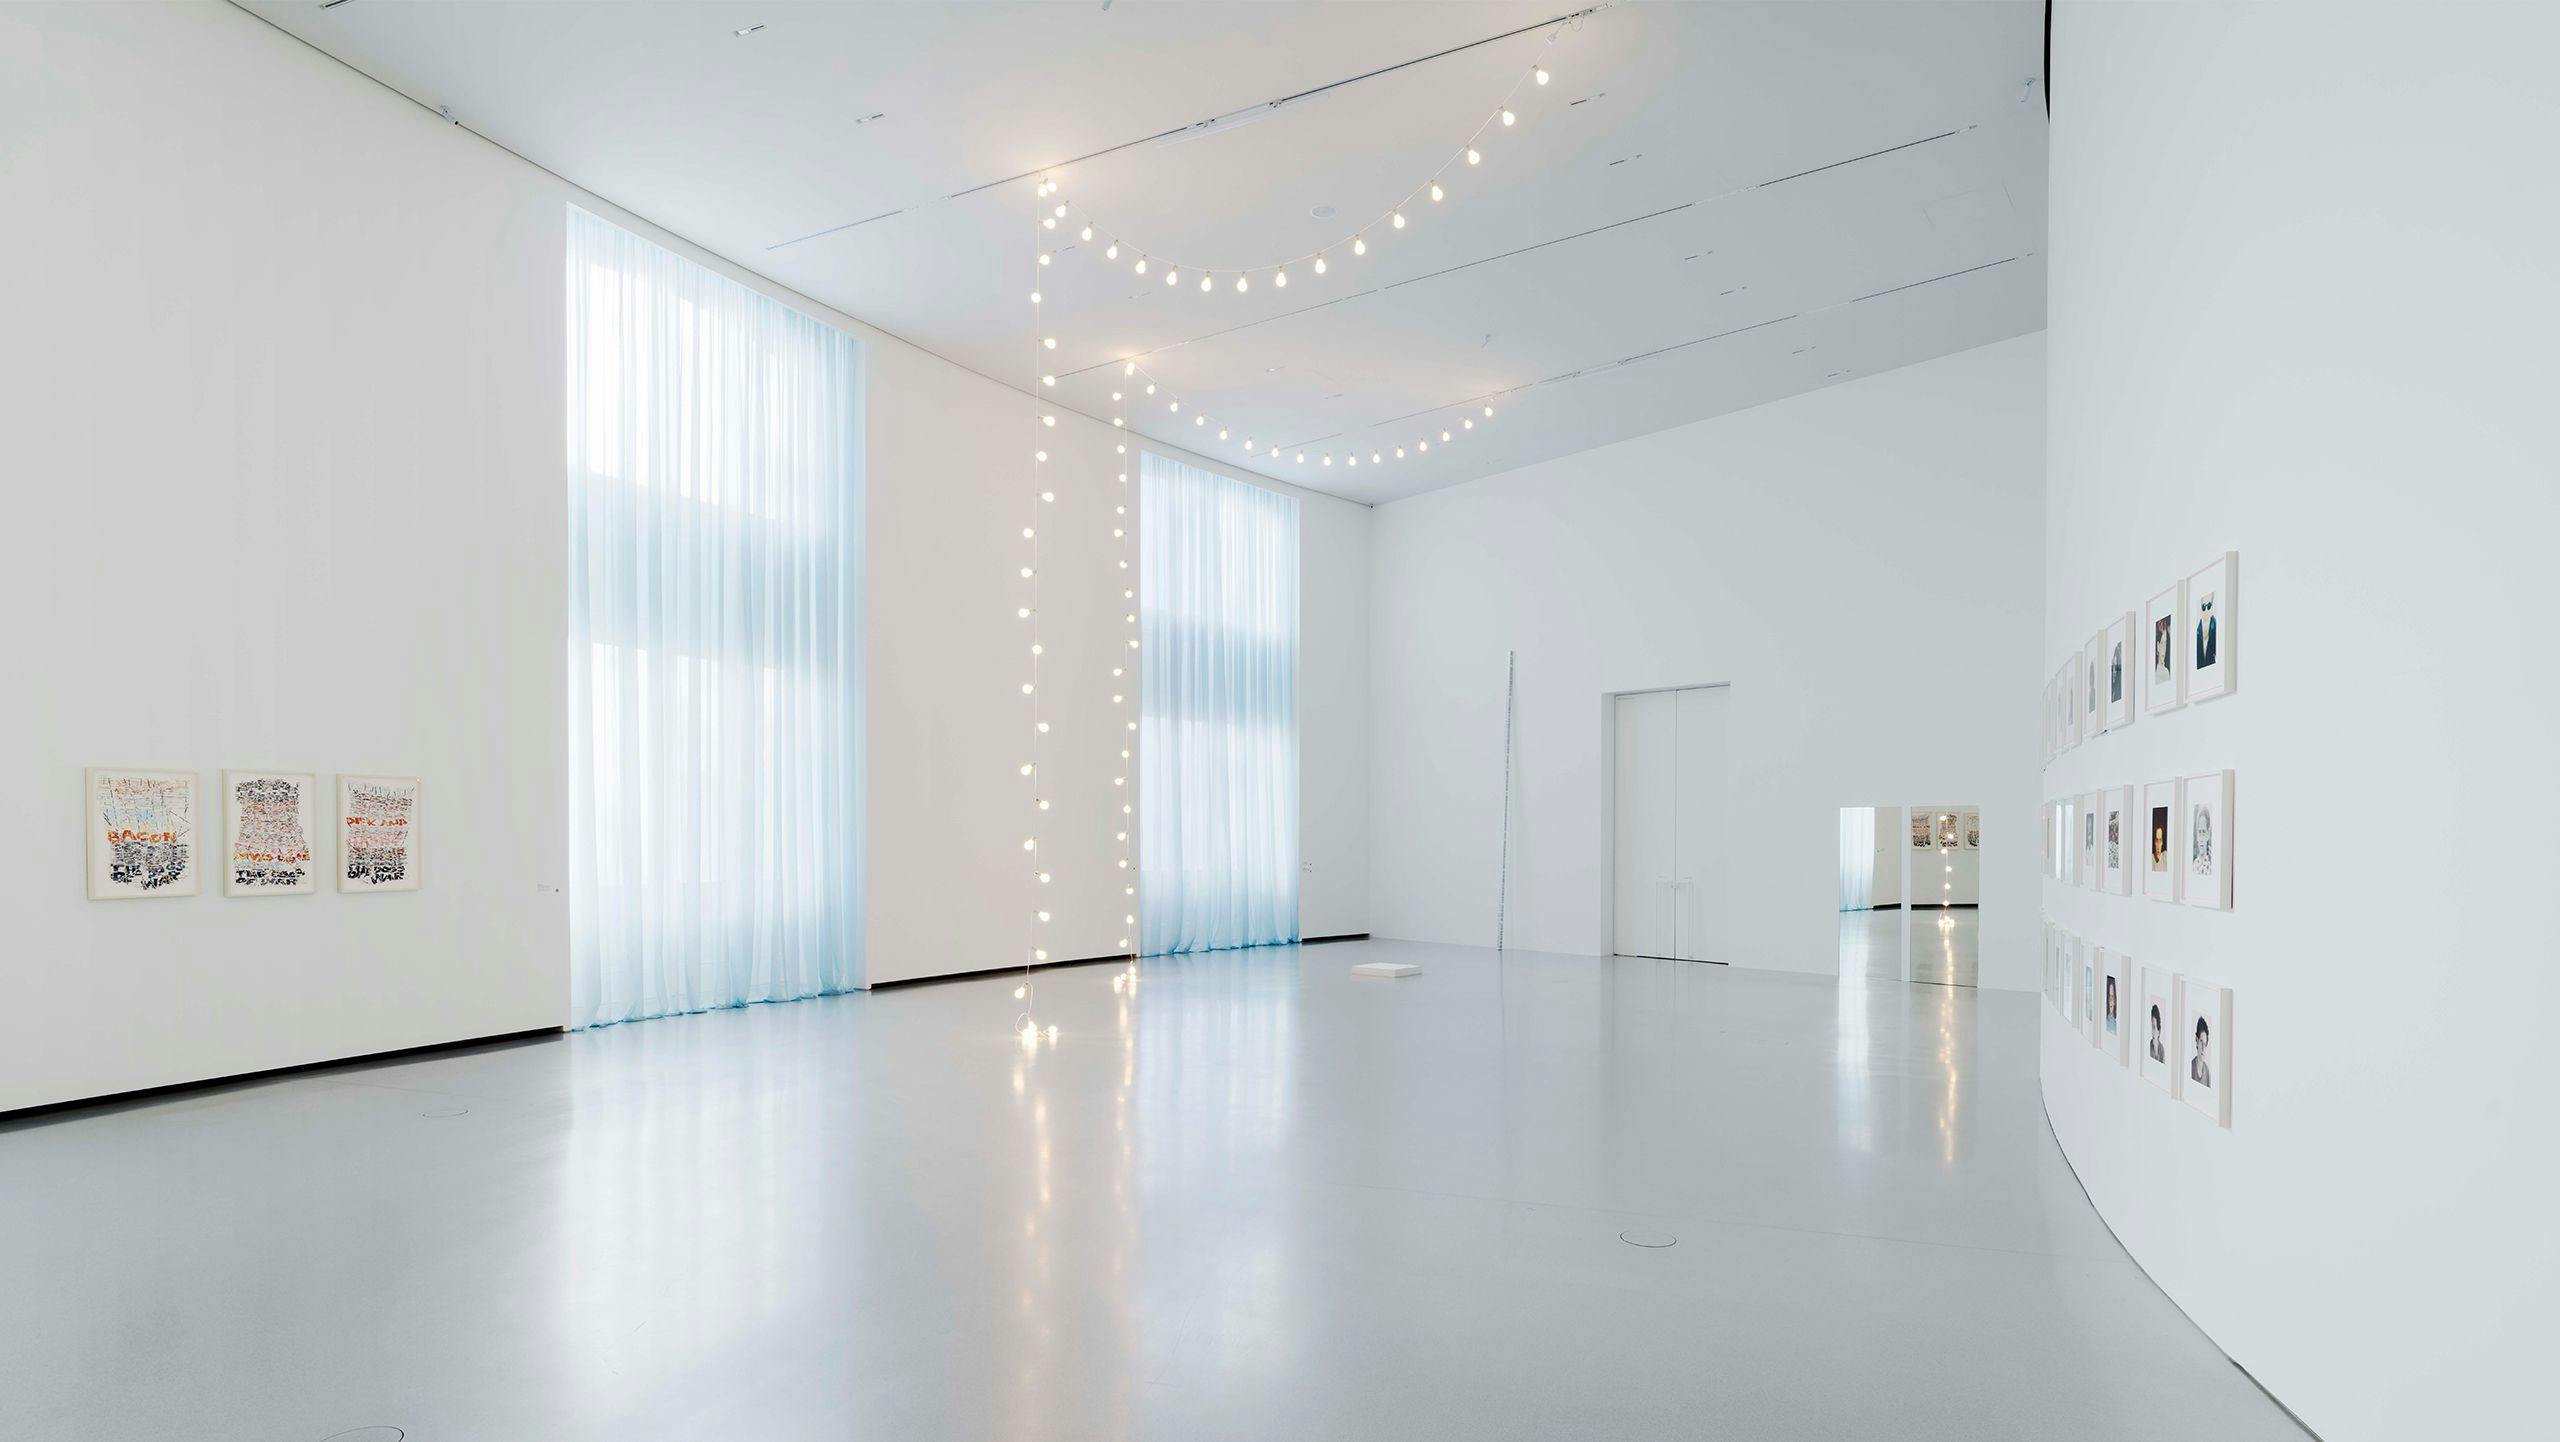 Installation view of an exhibition, titled Felix Gonzalez-Torres – Roni Horn, at Bourse de Commerce, Pinault Collection, in Paris, dated 2022. 